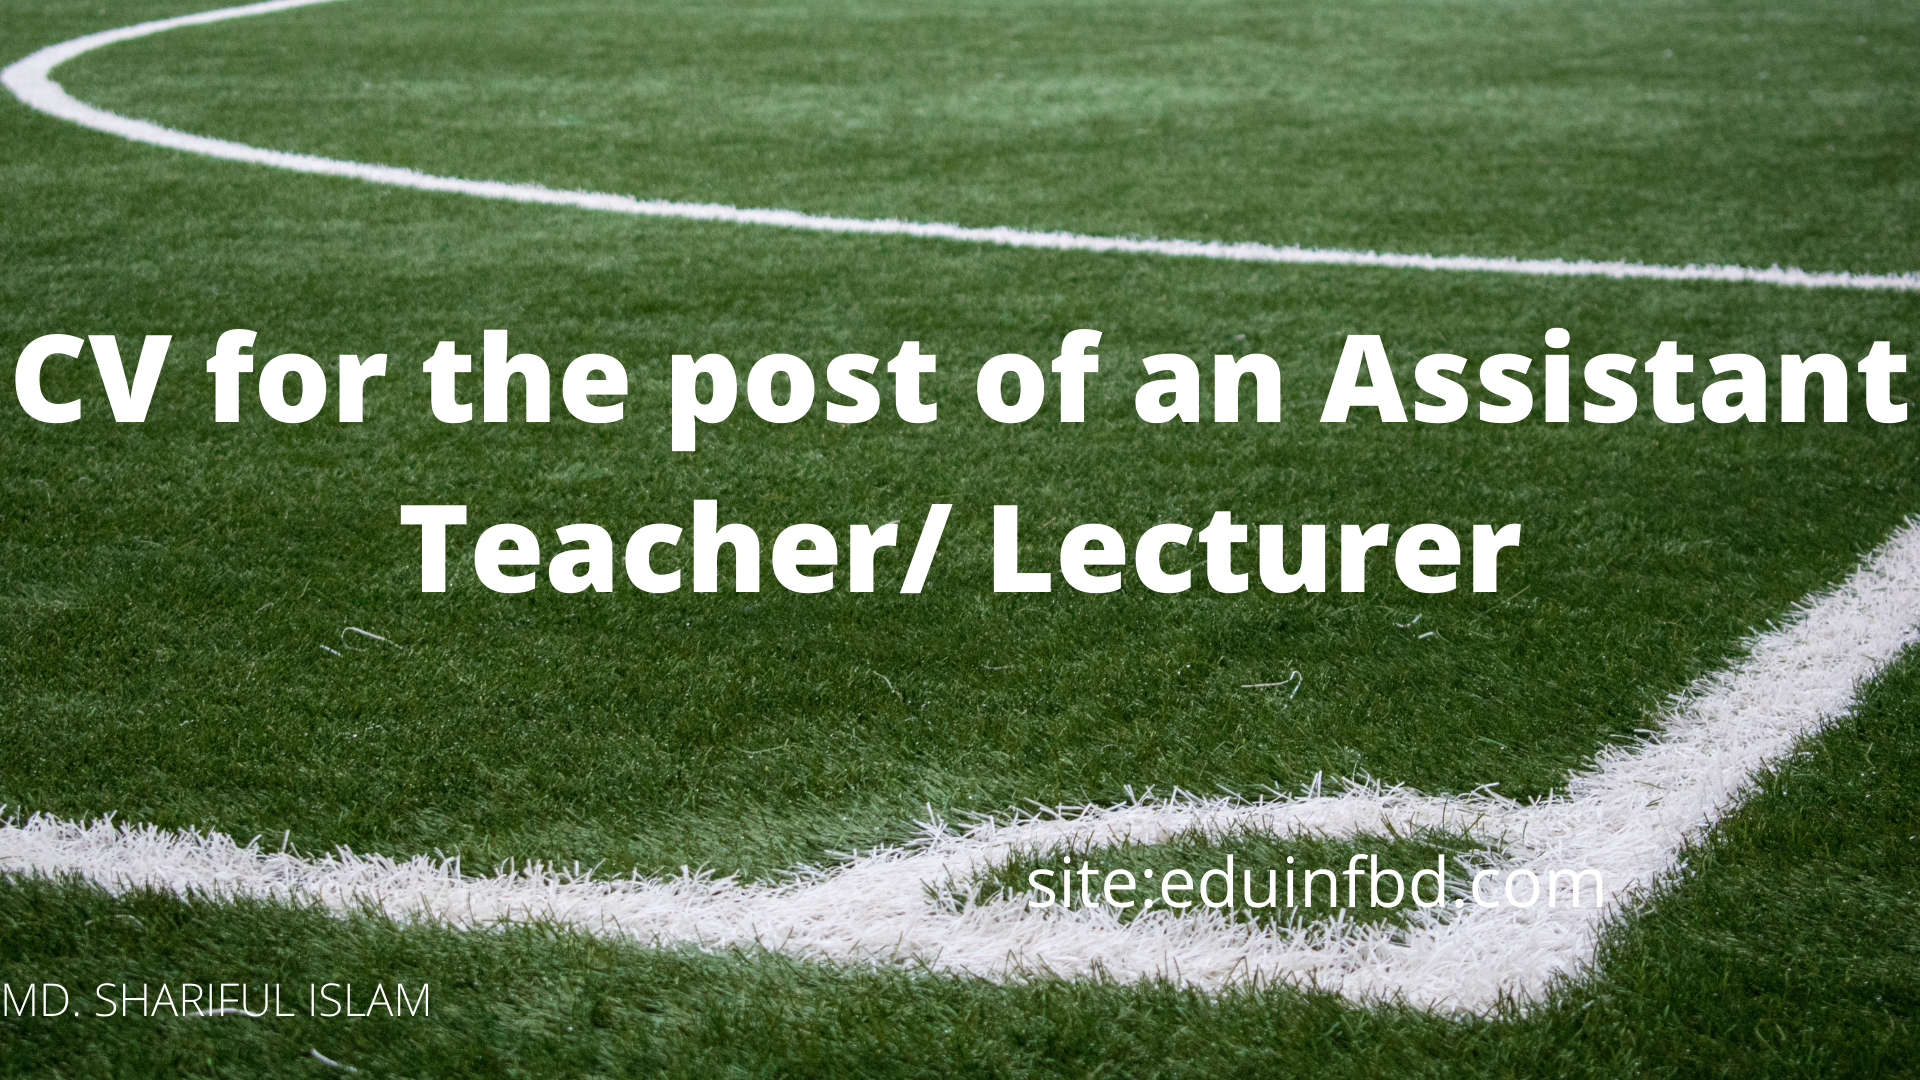 CV for the post of an Assistant Teacher/ Lecture